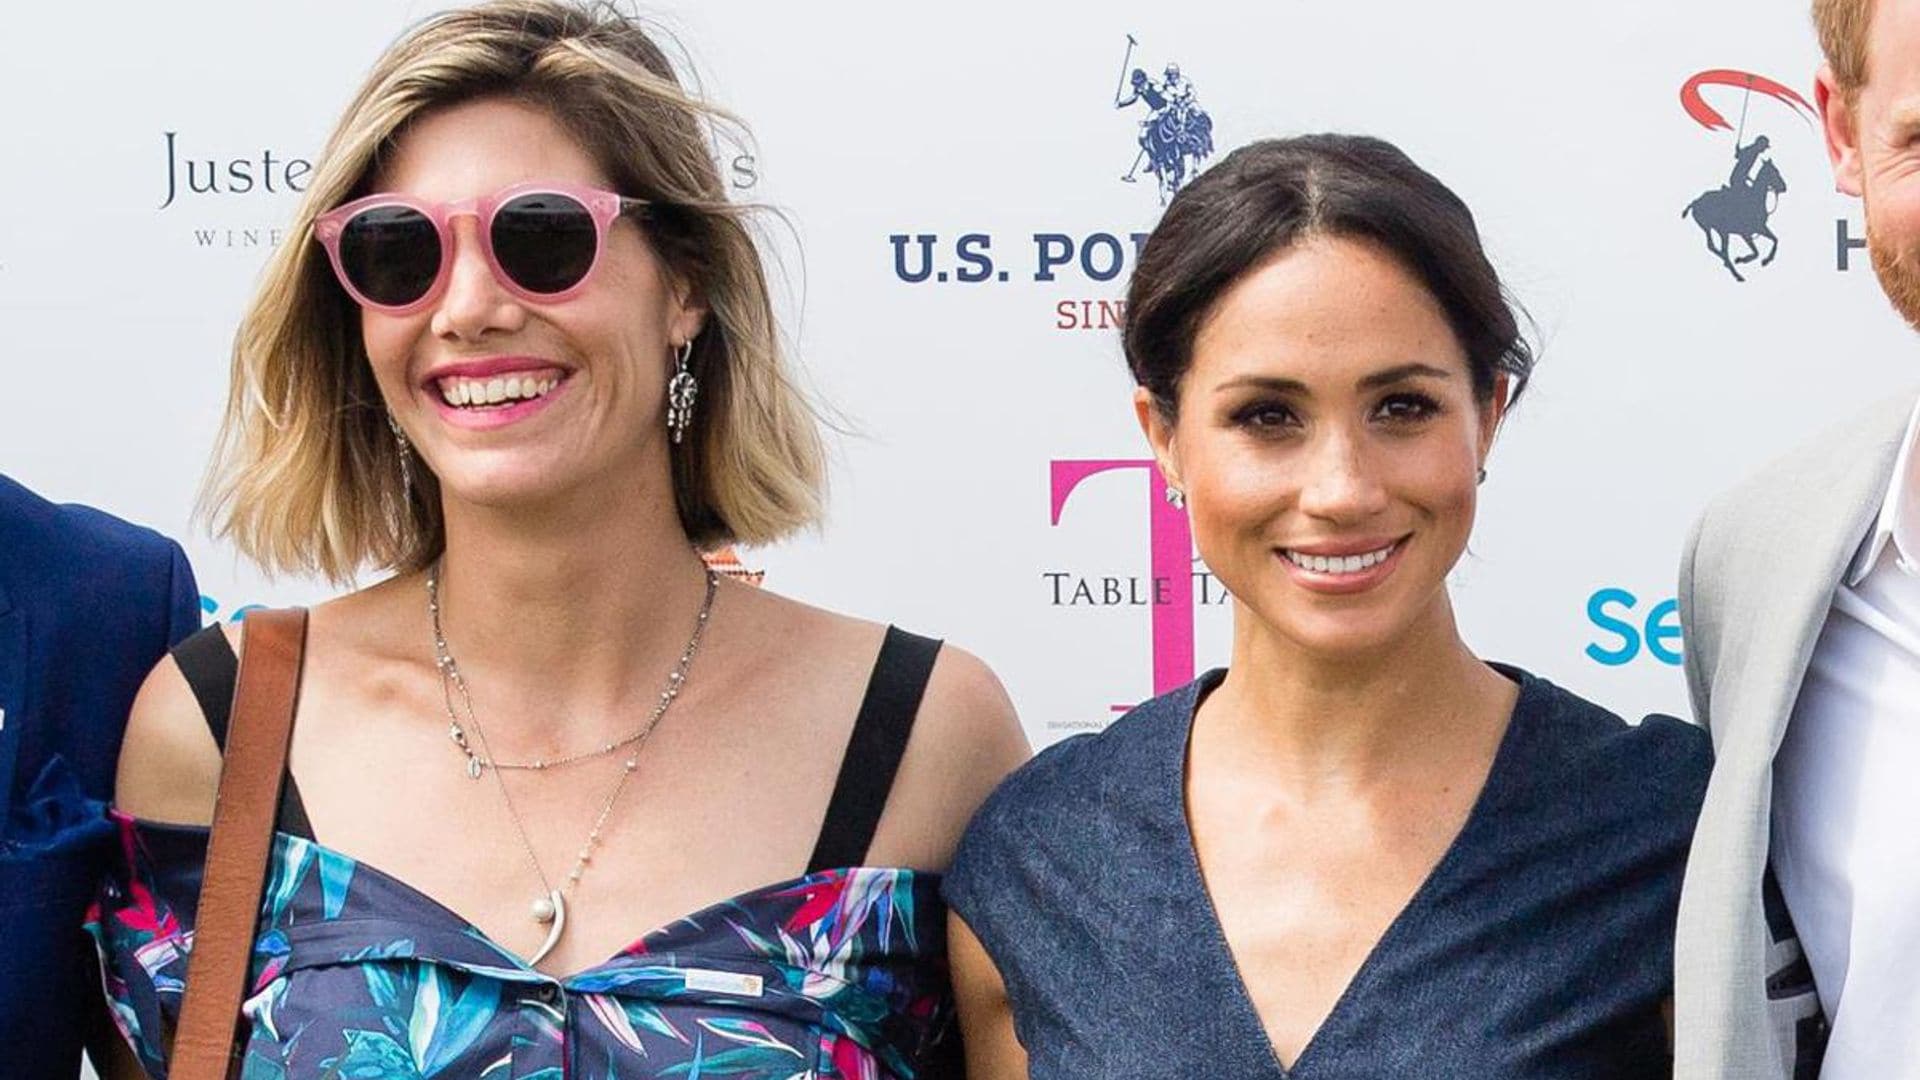 Nacho Figueras’ wife pens message to ‘sister’ Meghan Markle: ‘Keep walking, steady and strong’